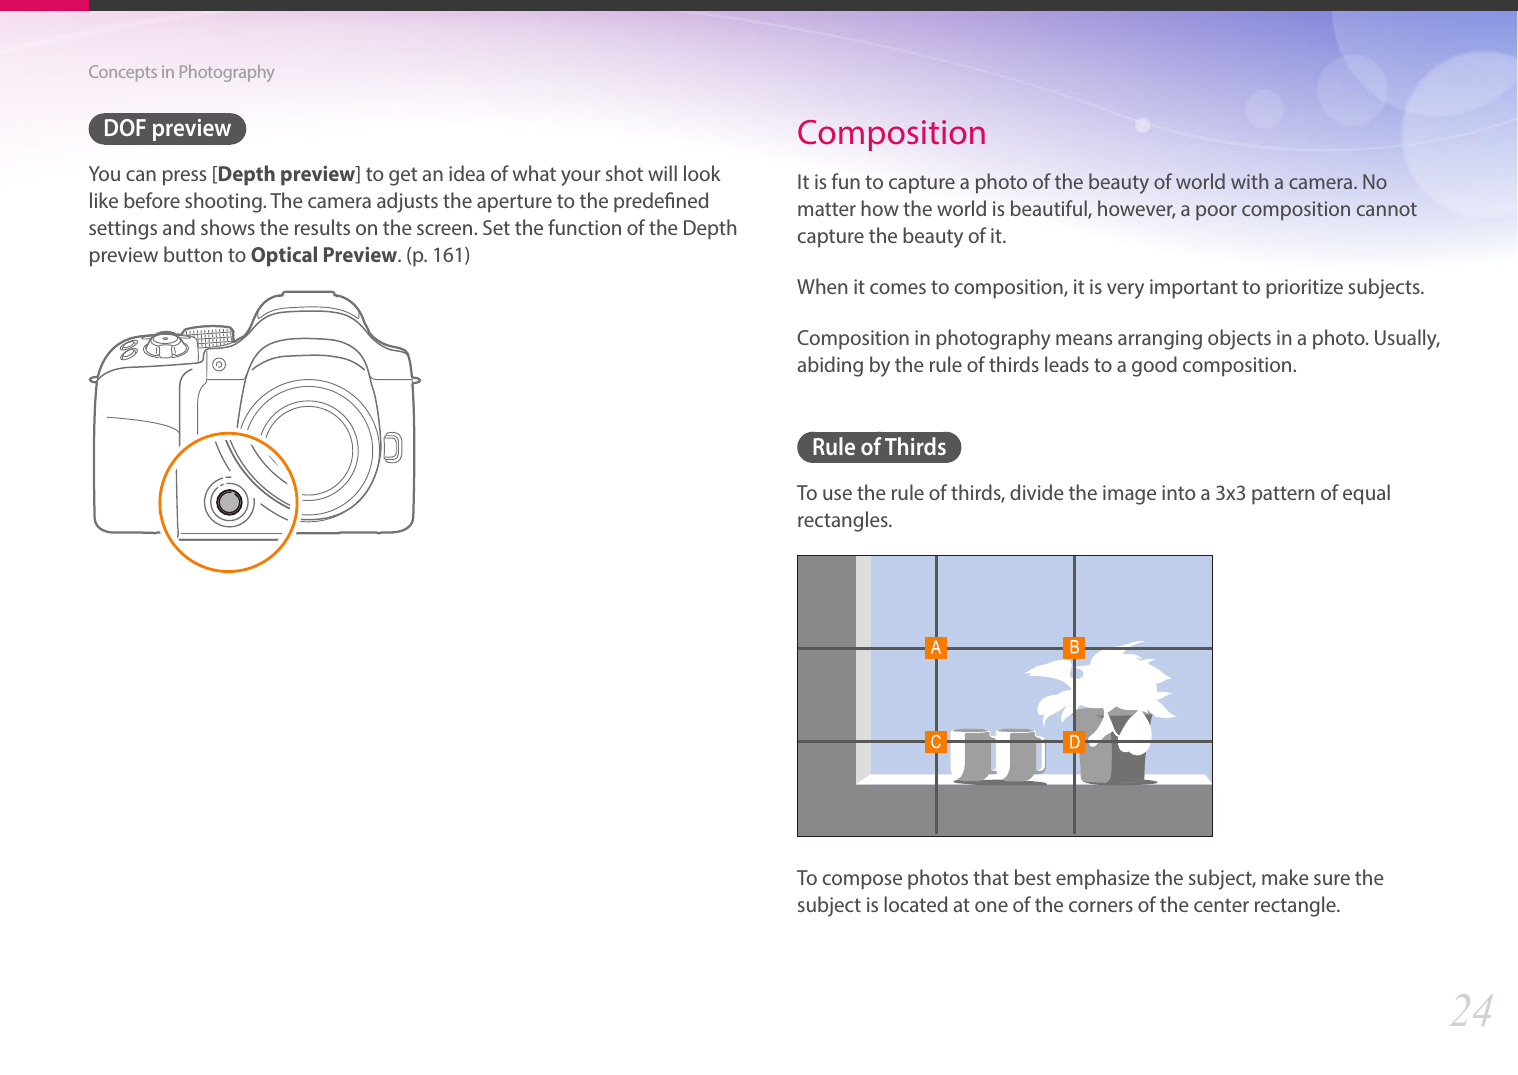 24Concepts in PhotographyDOF previewYou can press [Depth preview] to get an idea of what your shot will look like before shooting. The camera adjusts the aperture to the predened settings and shows the results on the screen. Set the function of the Depth preview button to Optical Preview. (p. 161)CompositionIt is fun to capture a photo of the beauty of world with a camera. No matter how the world is beautiful, however, a poor composition cannot capture the beauty of it.When it comes to composition, it is very important to prioritize subjects. Composition in photography means arranging objects in a photo. Usually, abiding by the rule of thirds leads to a good composition.Rule of ThirdsTo use the rule of thirds, divide the image into a 3x3 pattern of equal rectangles.To compose photos that best emphasize the subject, make sure the subject is located at one of the corners of the center rectangle.